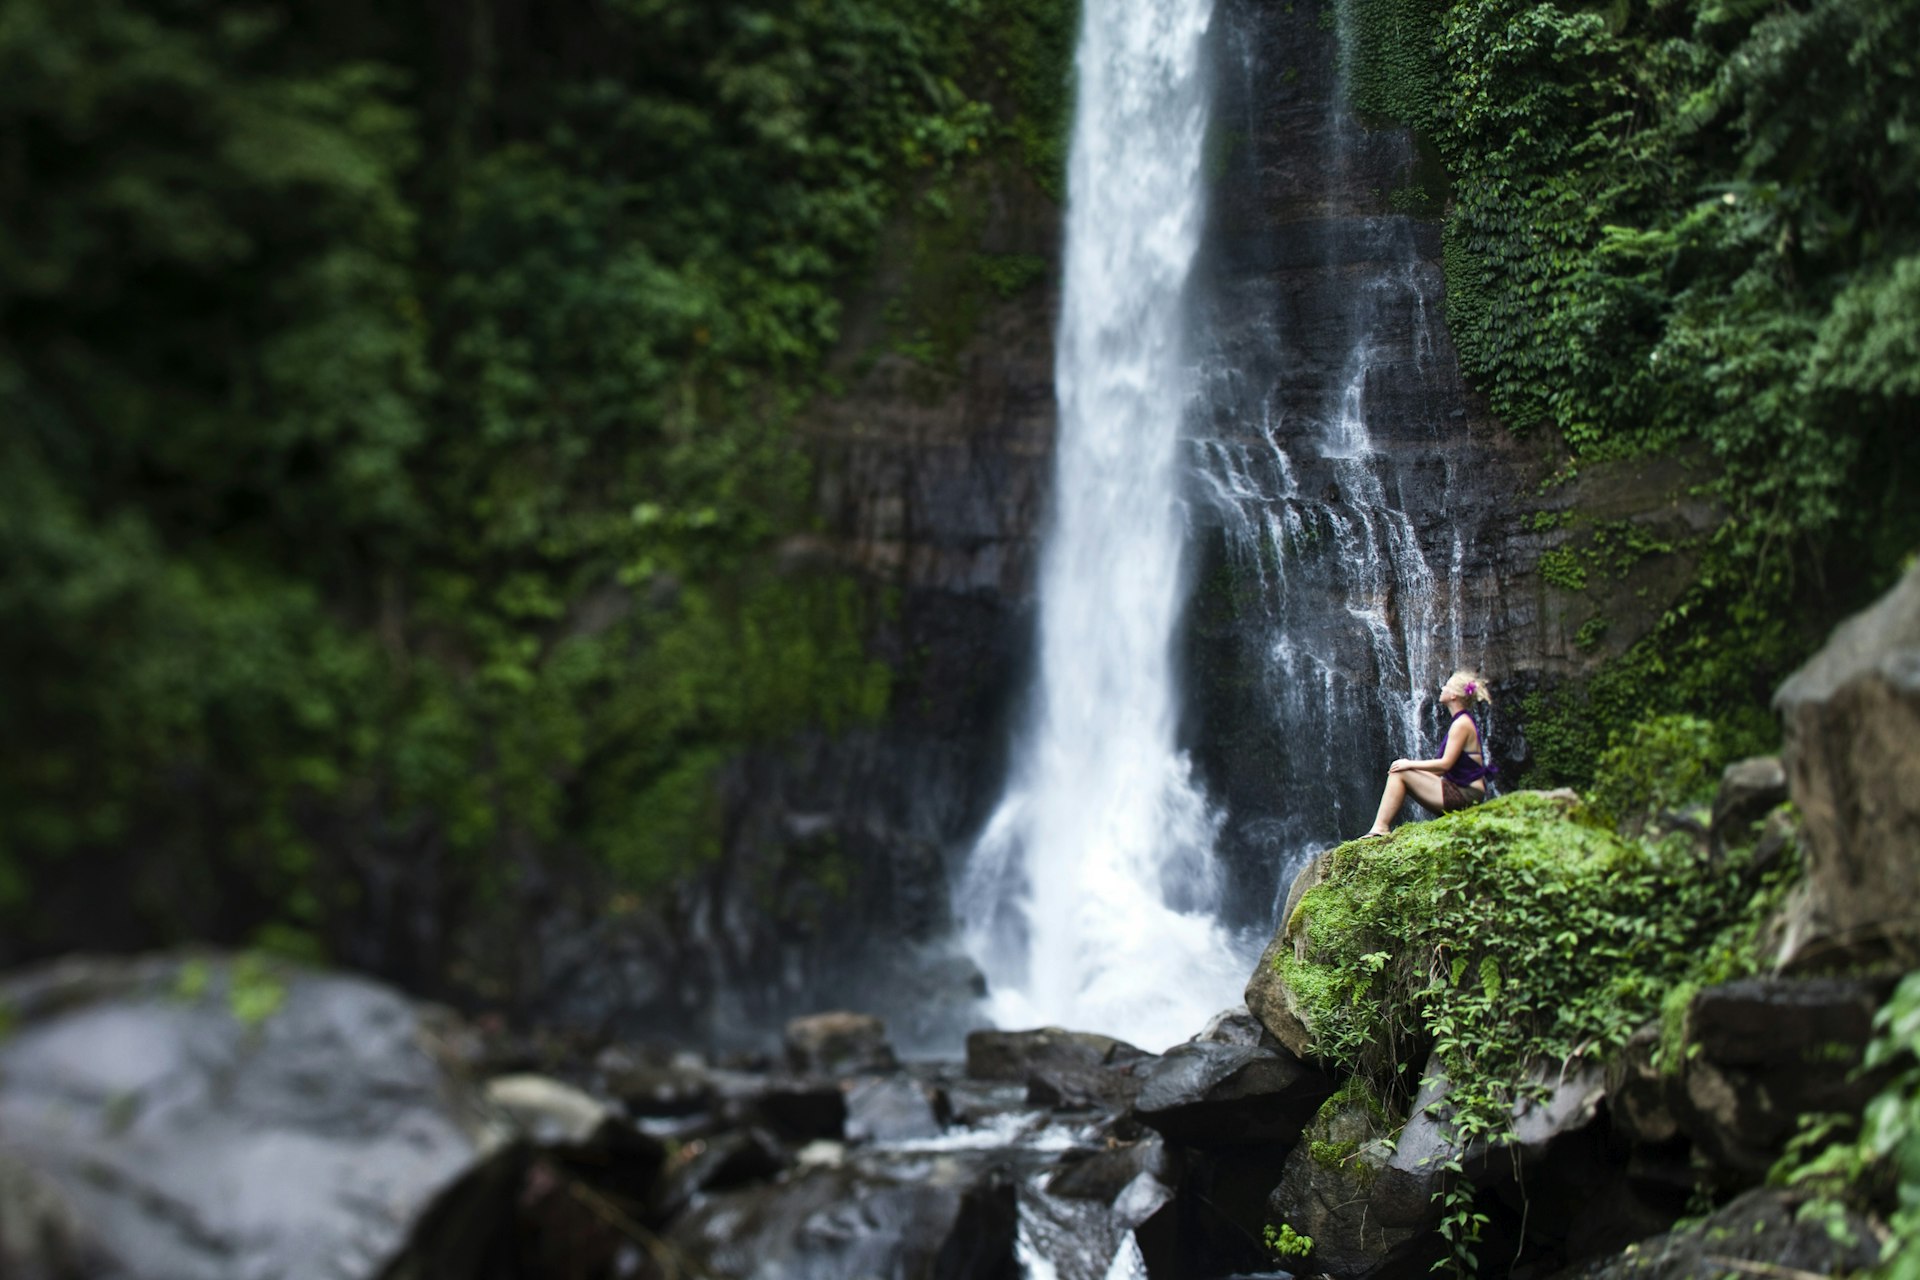 A woman sits close to a waterfall in Bali which is surrounded by verdent green forest